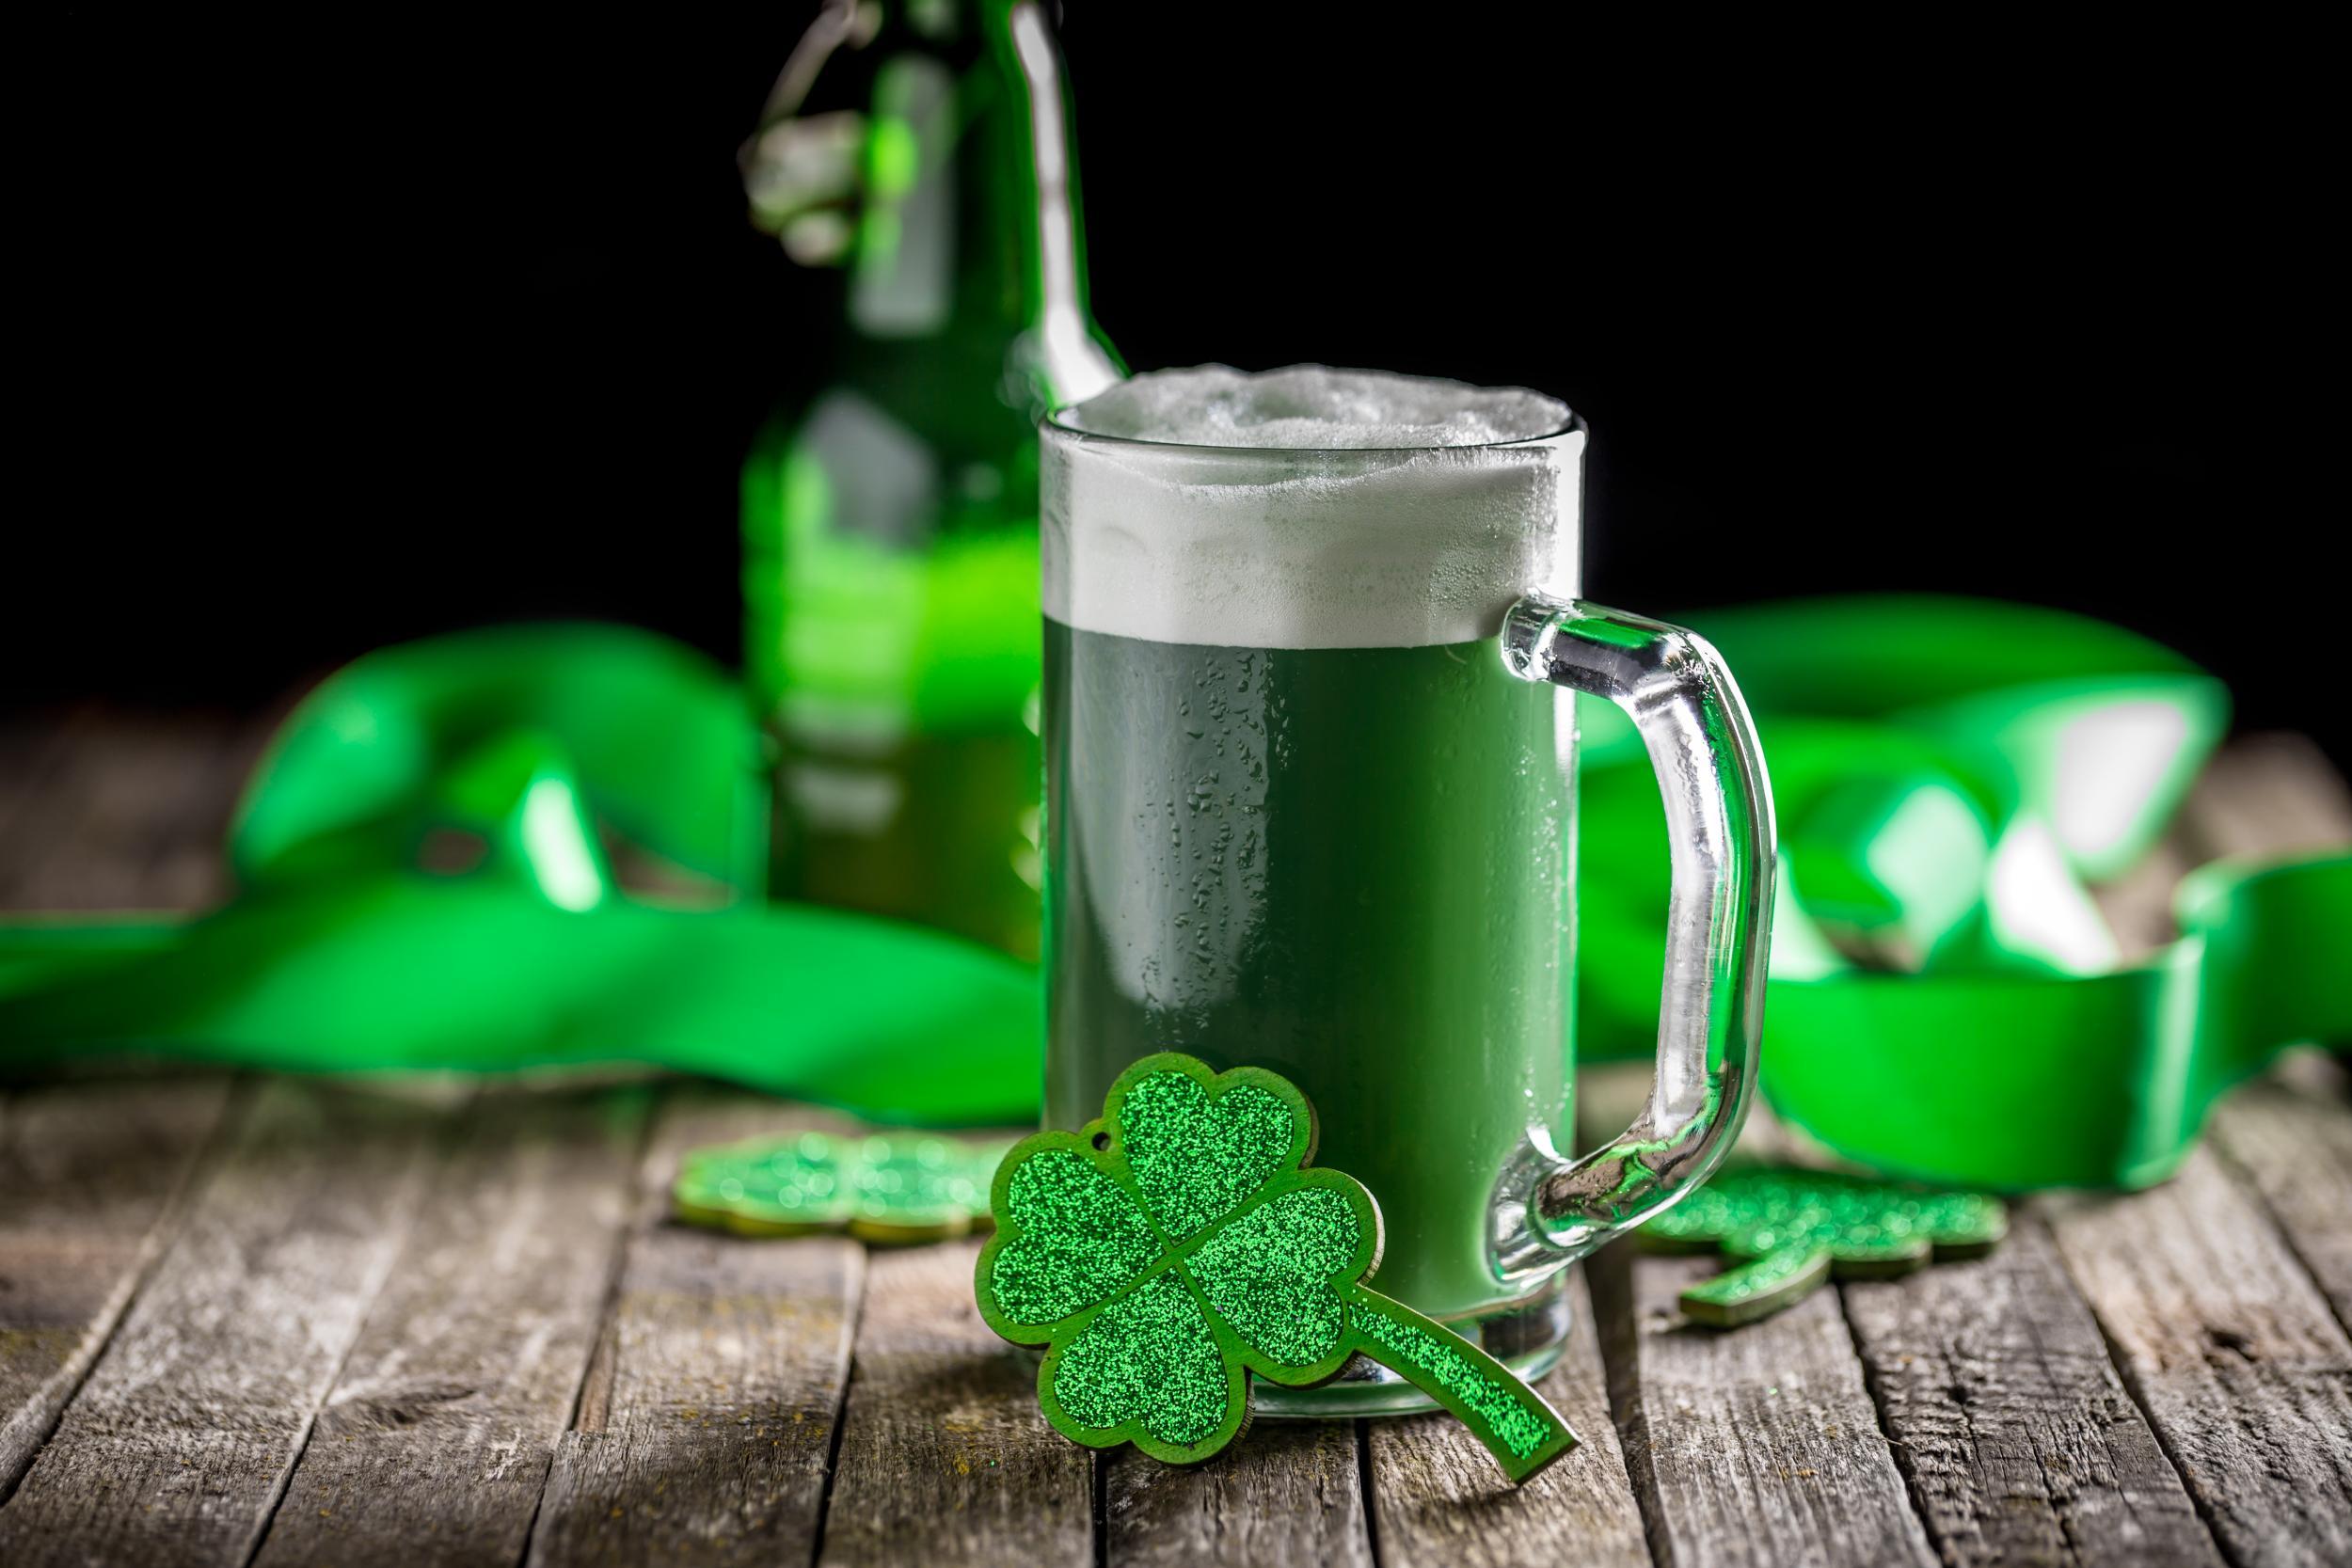 What is the true meaning of Saint Patrick's Day?